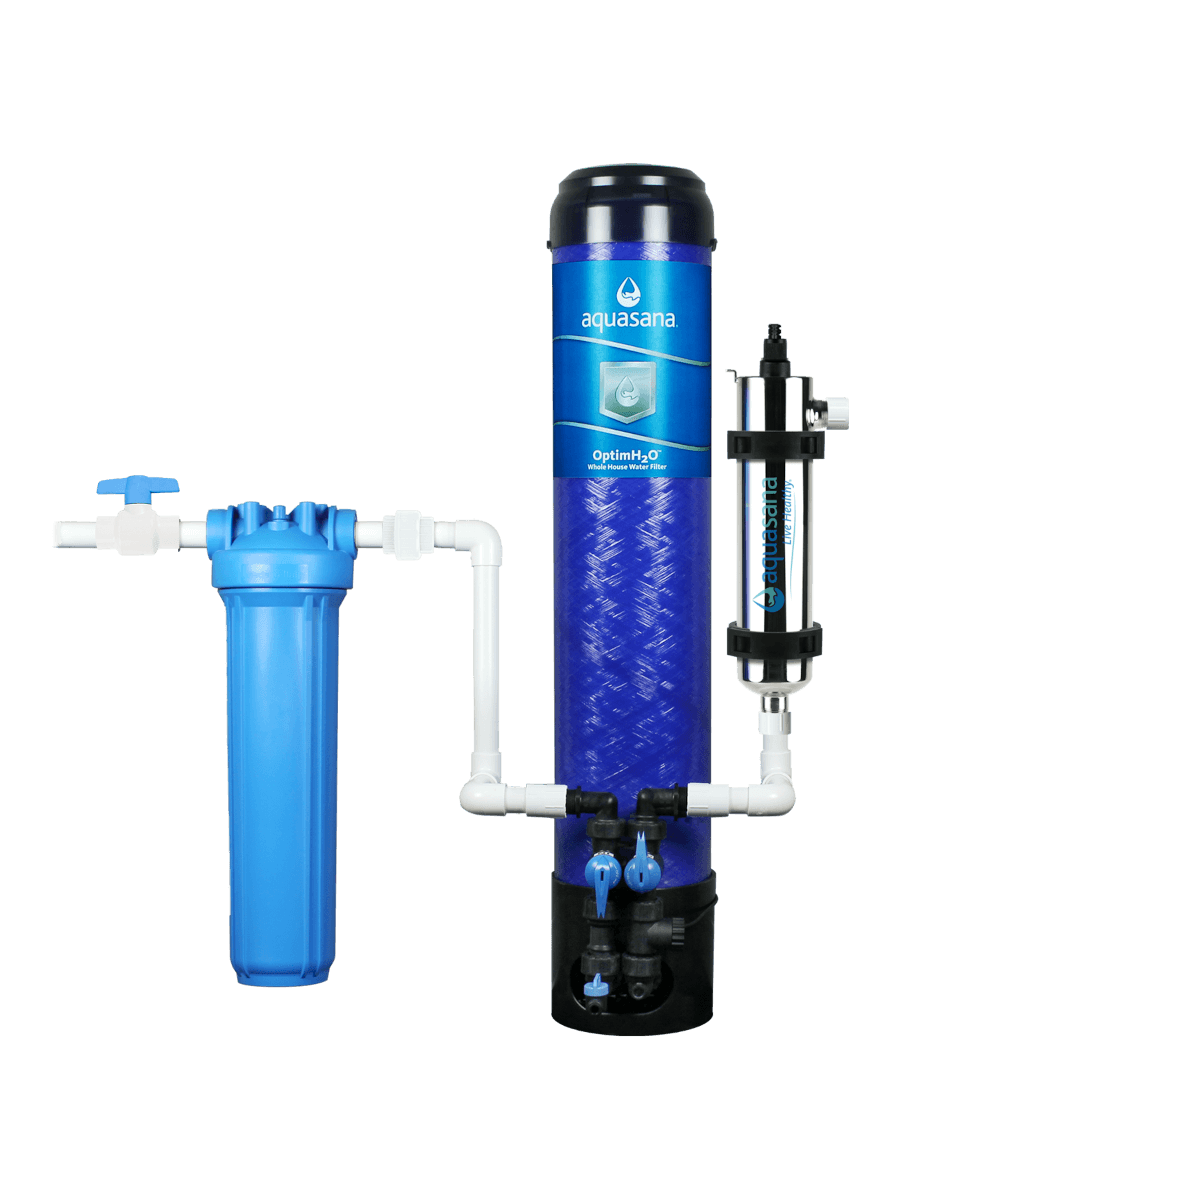 OptimH2O® Whole House Water Filter System For Home With UV Filter Removes 99% of Bacteria & Viruses Reduces Lead, Cysts, & PFOA/PFOS Aquasana